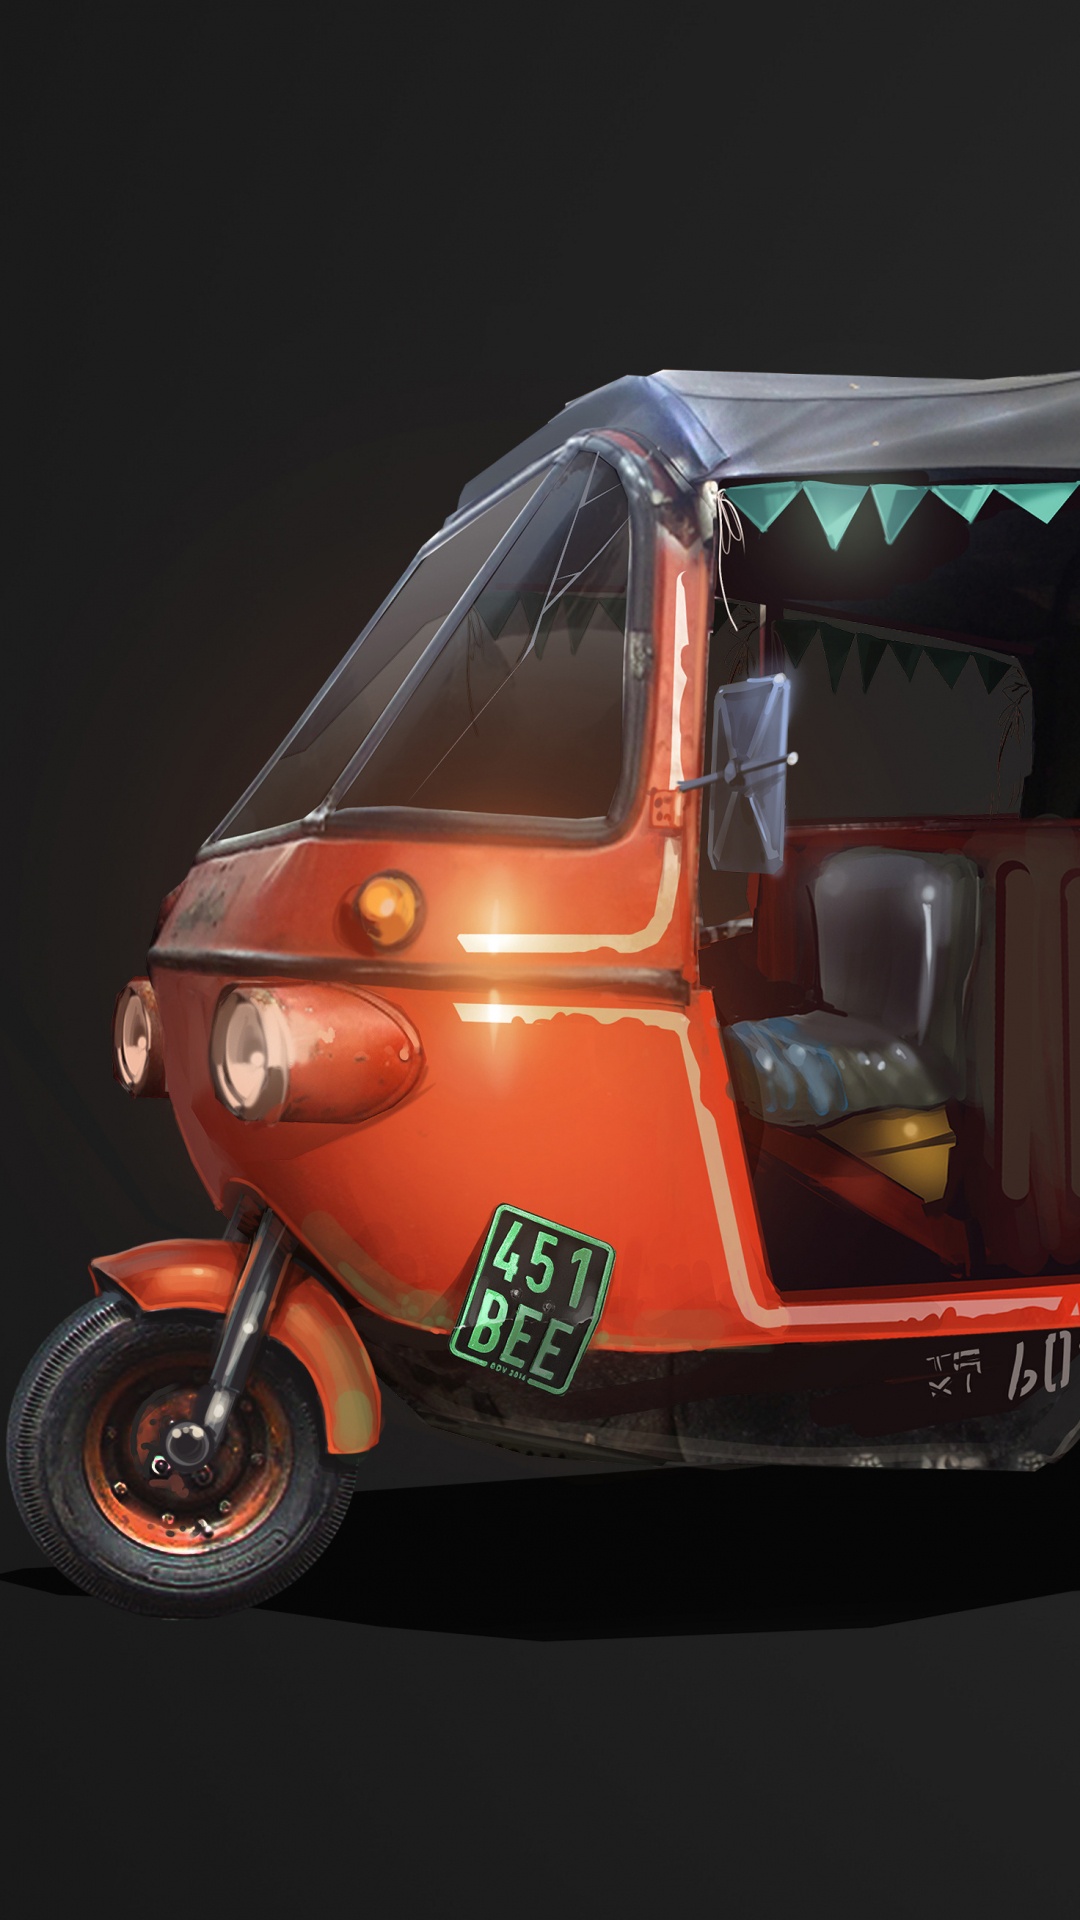 Red and Black Auto Rickshaw. Wallpaper in 1080x1920 Resolution